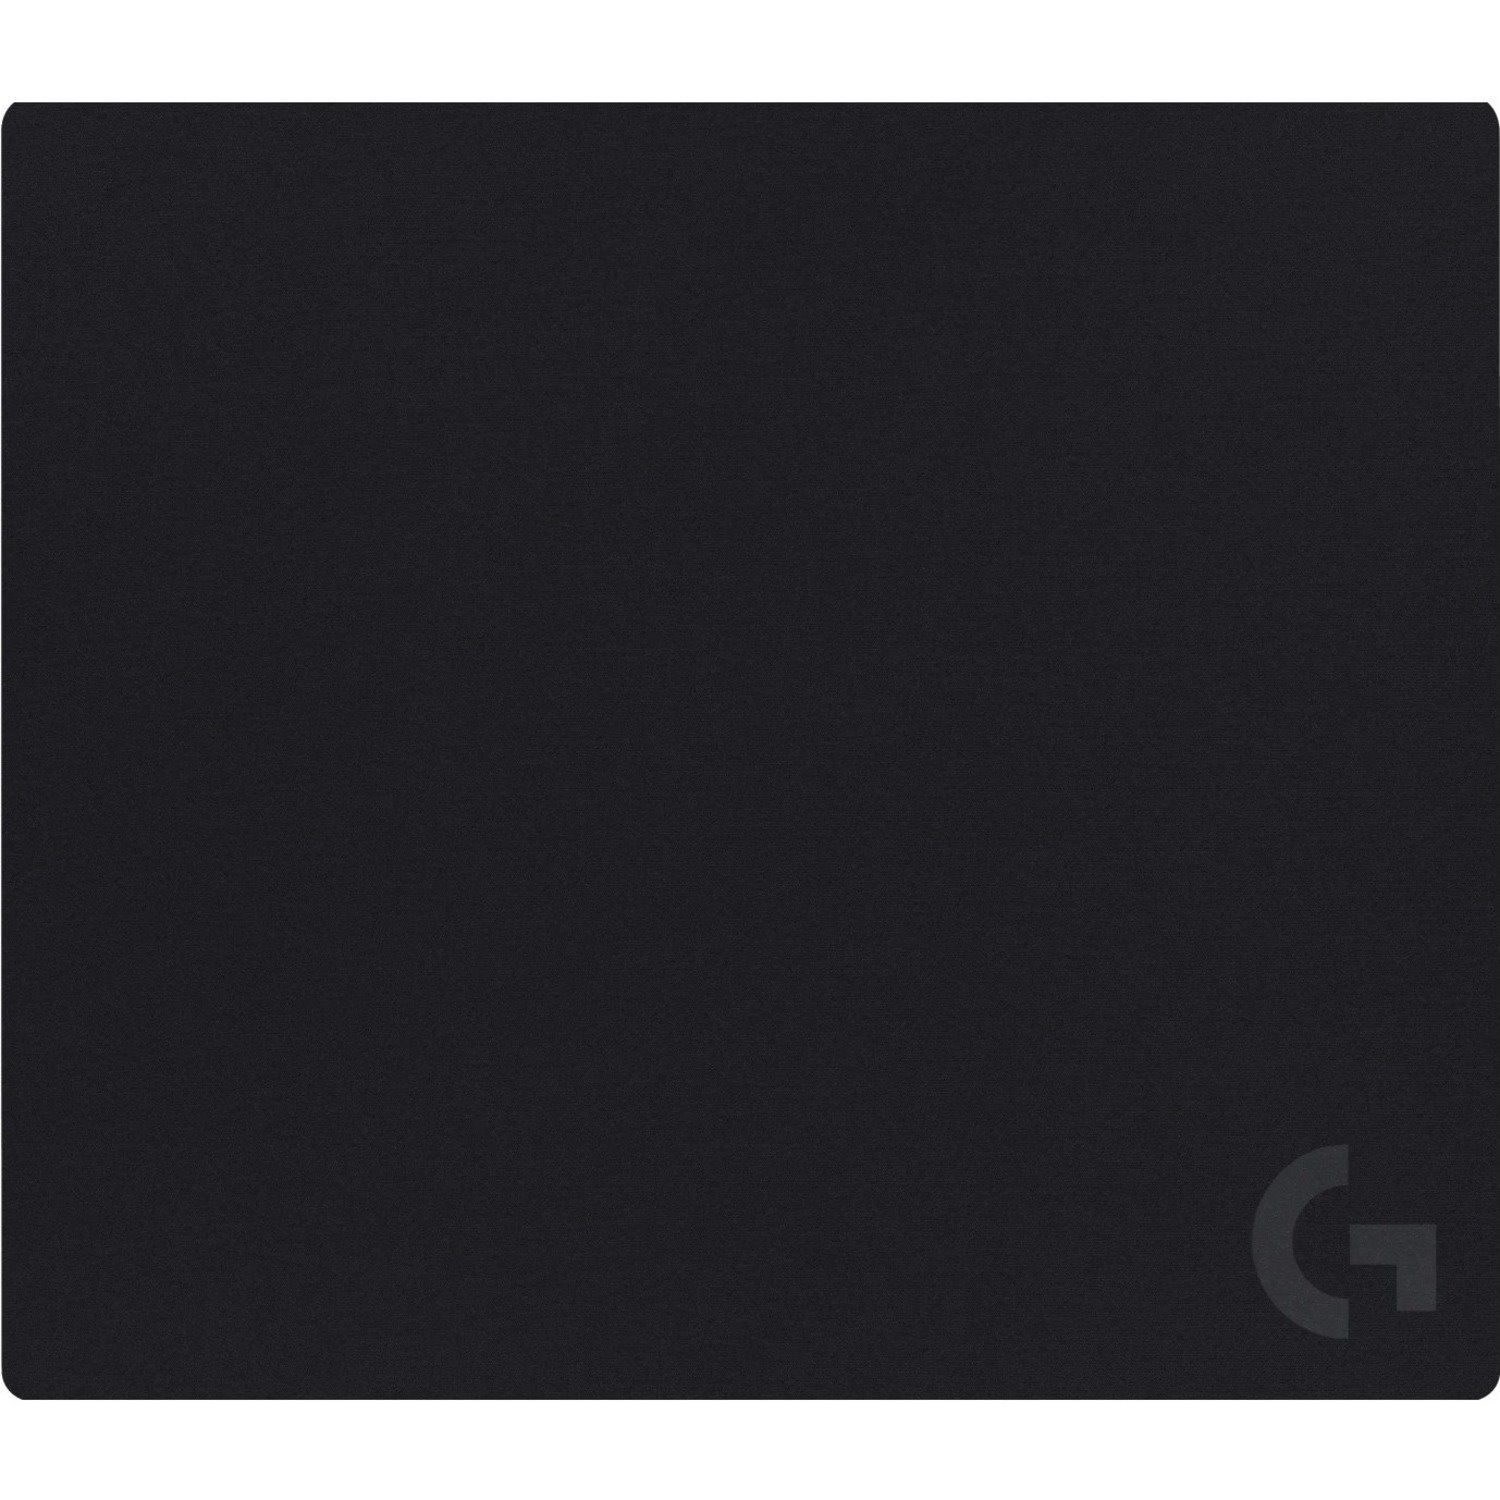 Logitech G G640 Large Cloth Gaming Mouse Pad